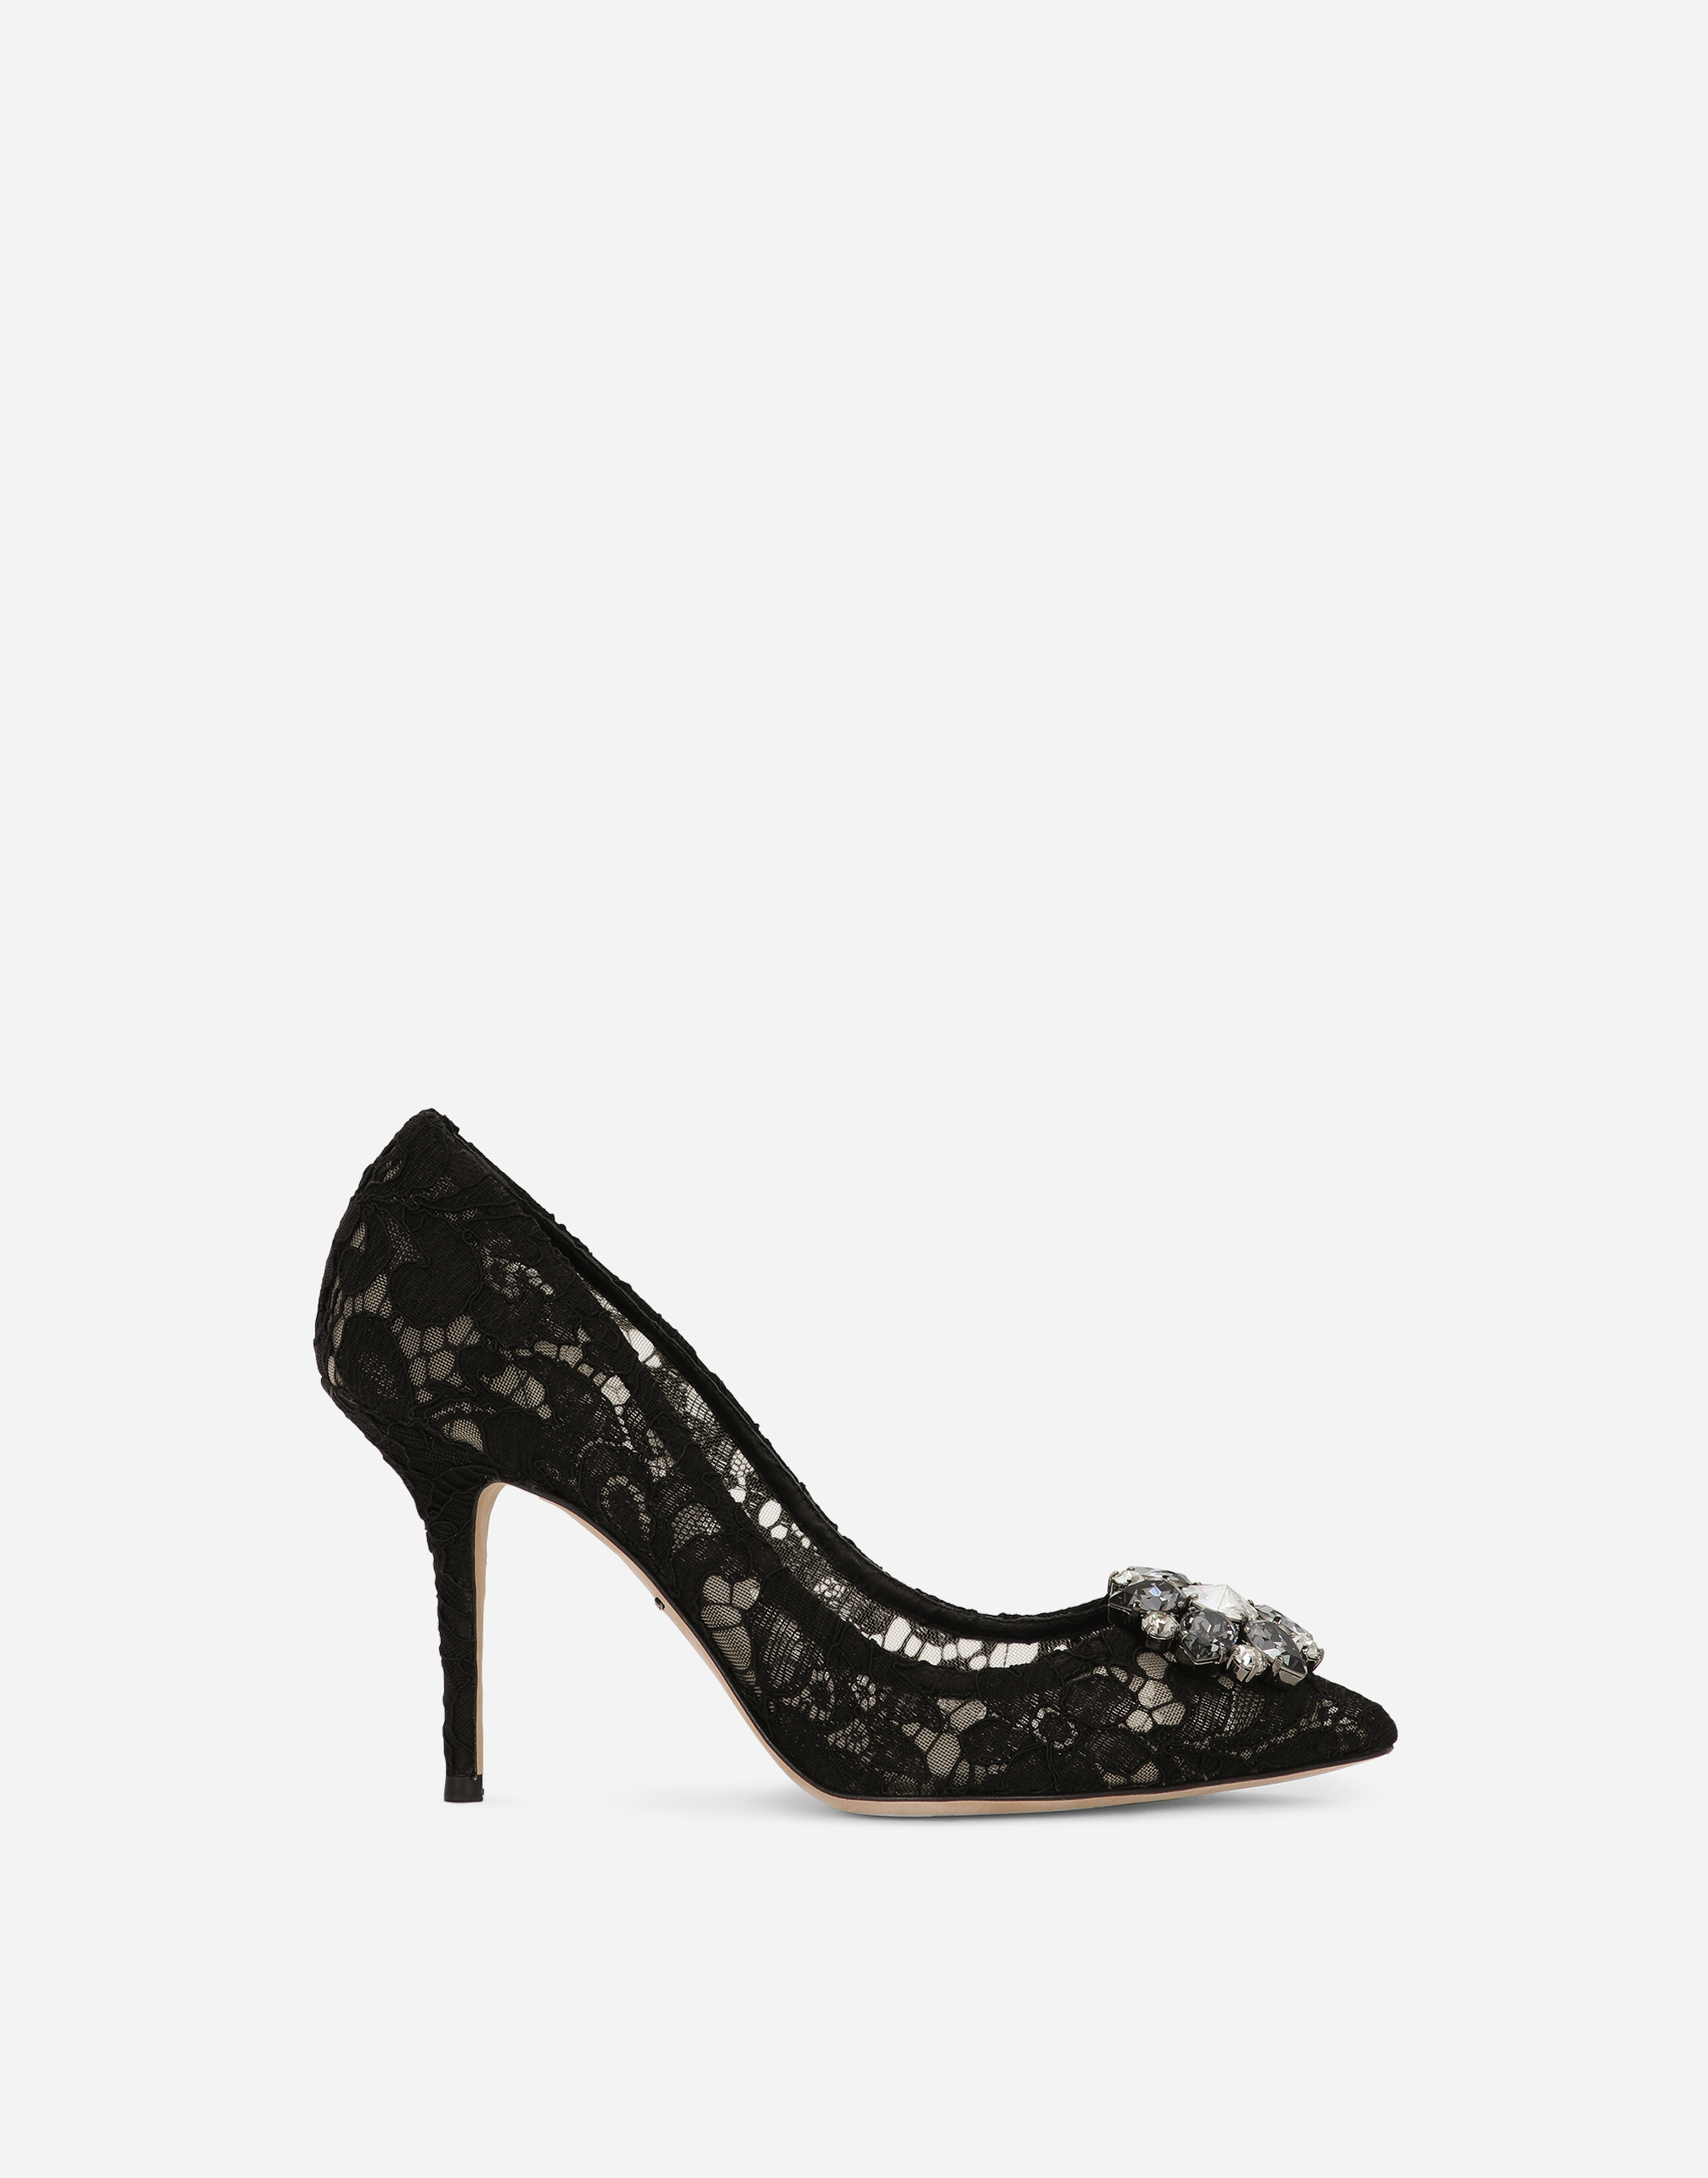 Lace rainbow pumps with brooch detailing in Black